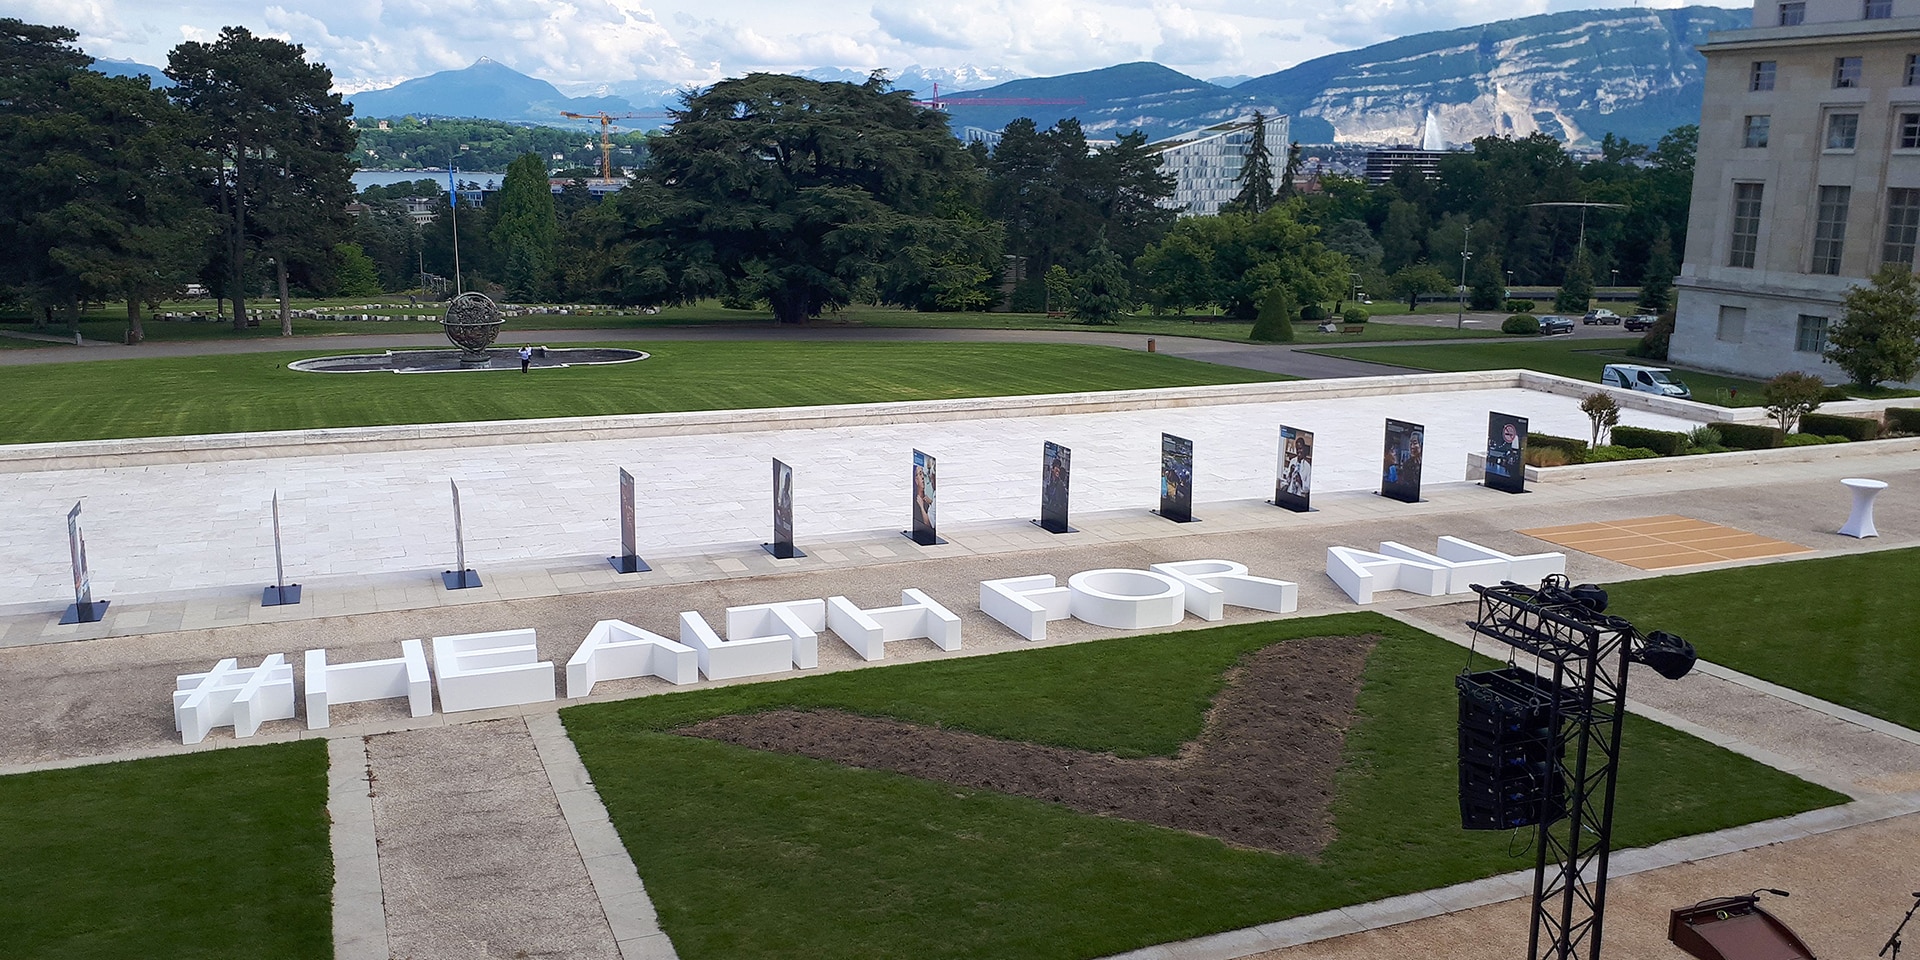 On the lawn in front of the United Nations' main building in Geneva, the words #HEALTH FOR ALL are written in large letters.